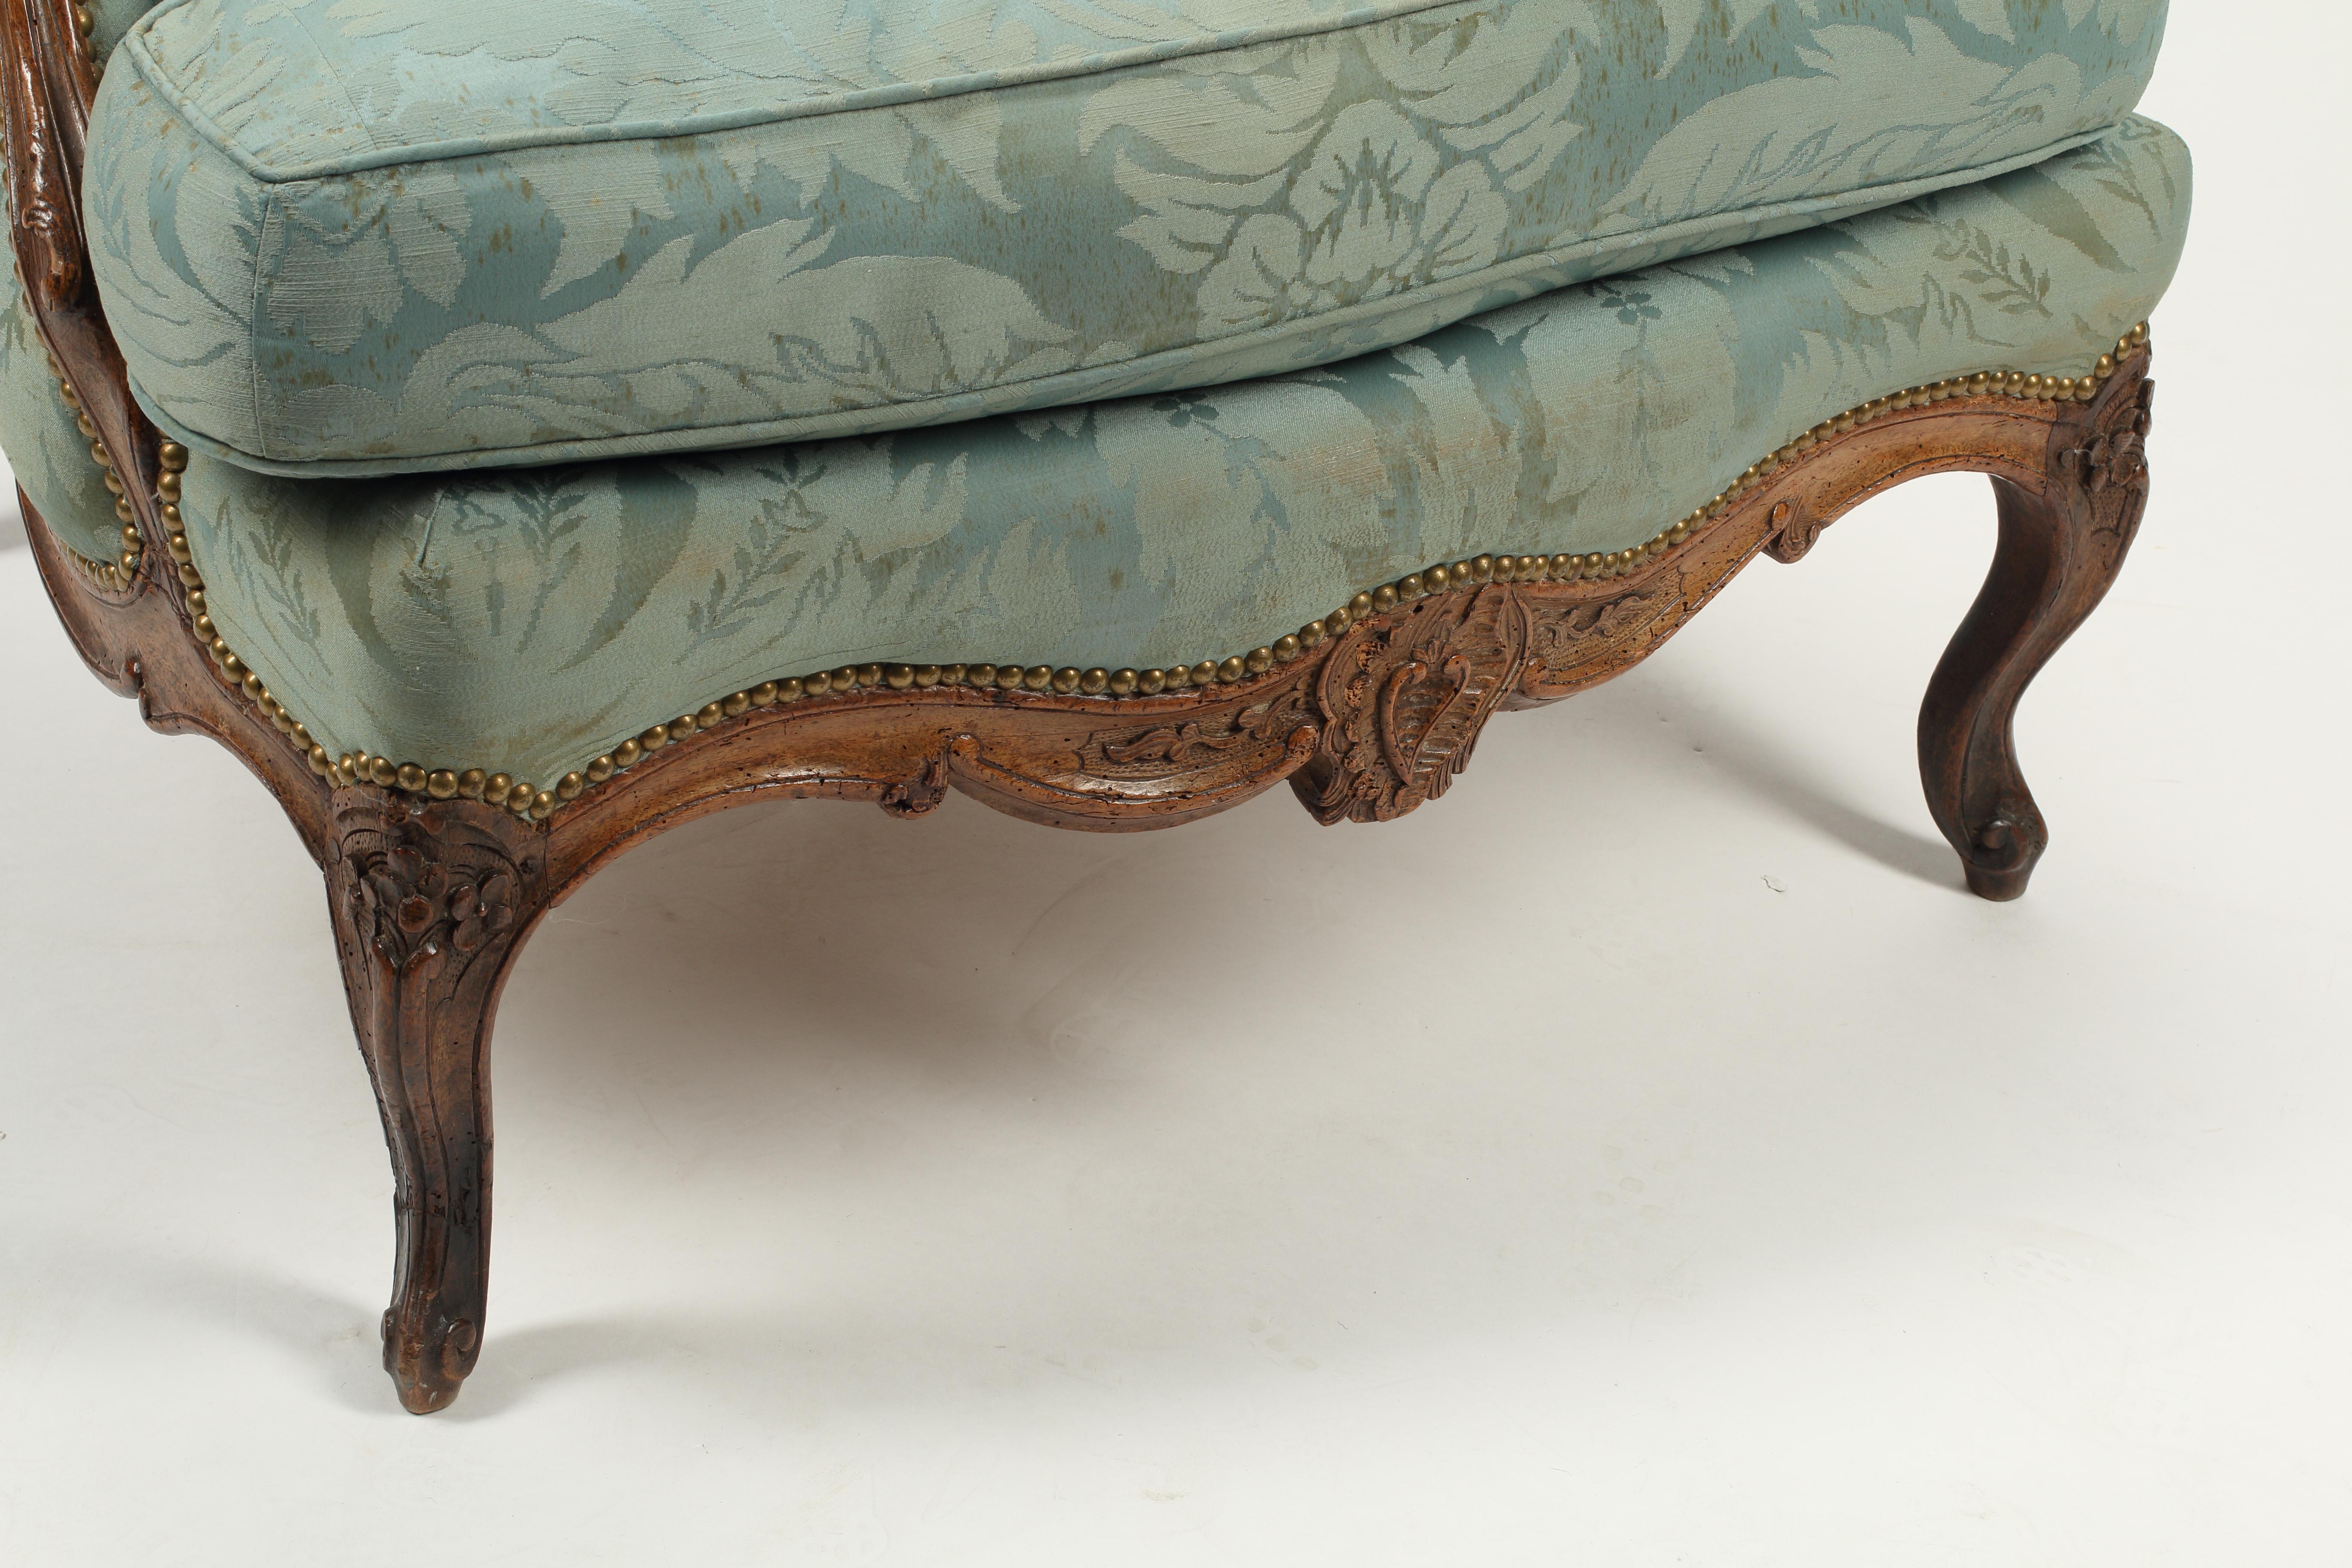 This statement 18th century French walnut bergère is a stunning example of the craftsmanship and artistry of this period. The French provincial chair is made from solid walnut and features exquisitely carved details, including a rocaille inspired